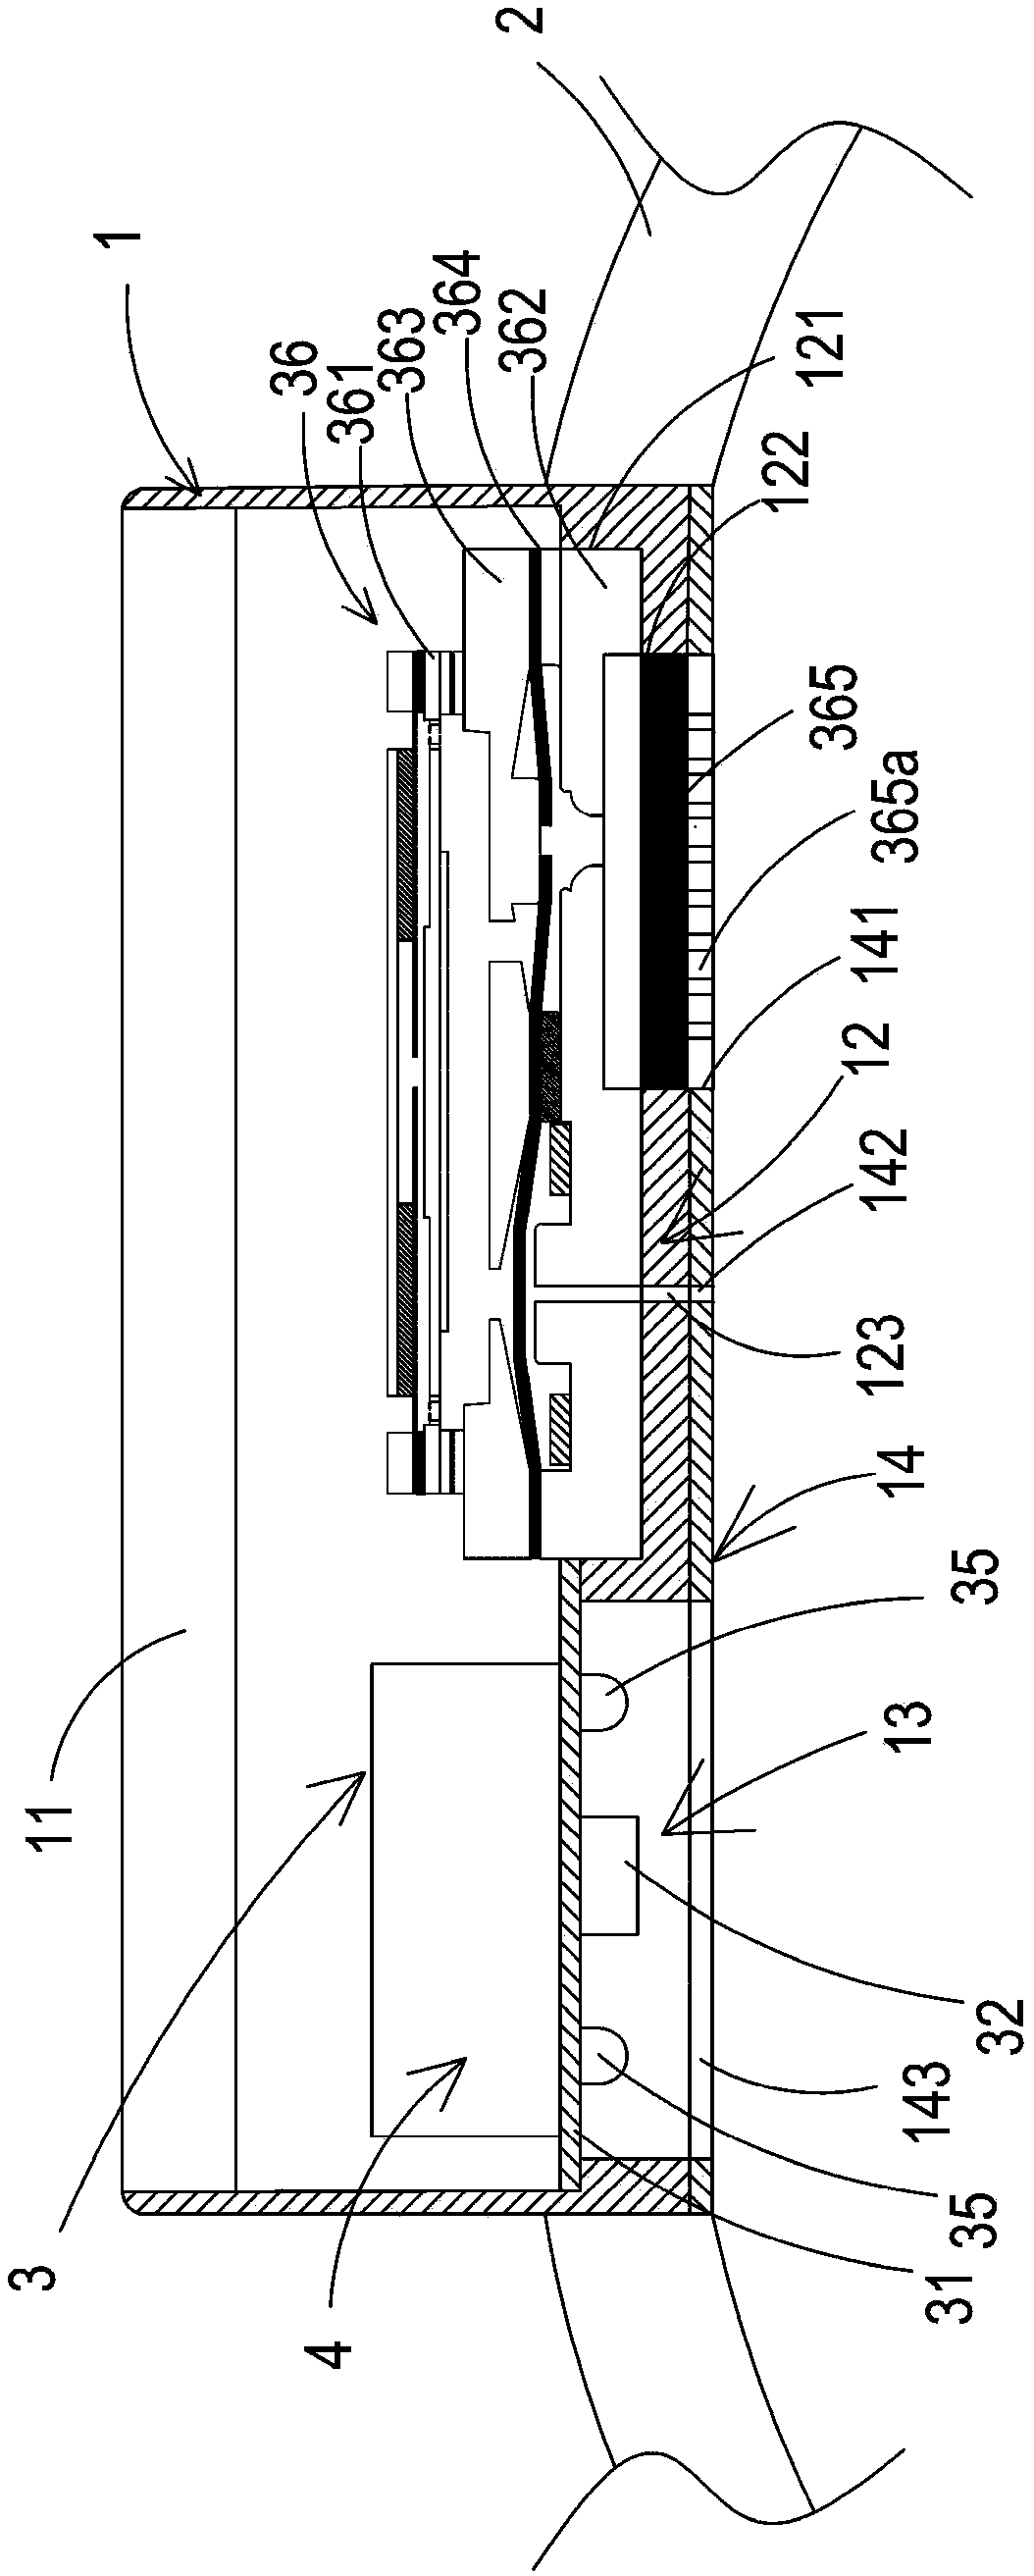 Wearable health monitoring device